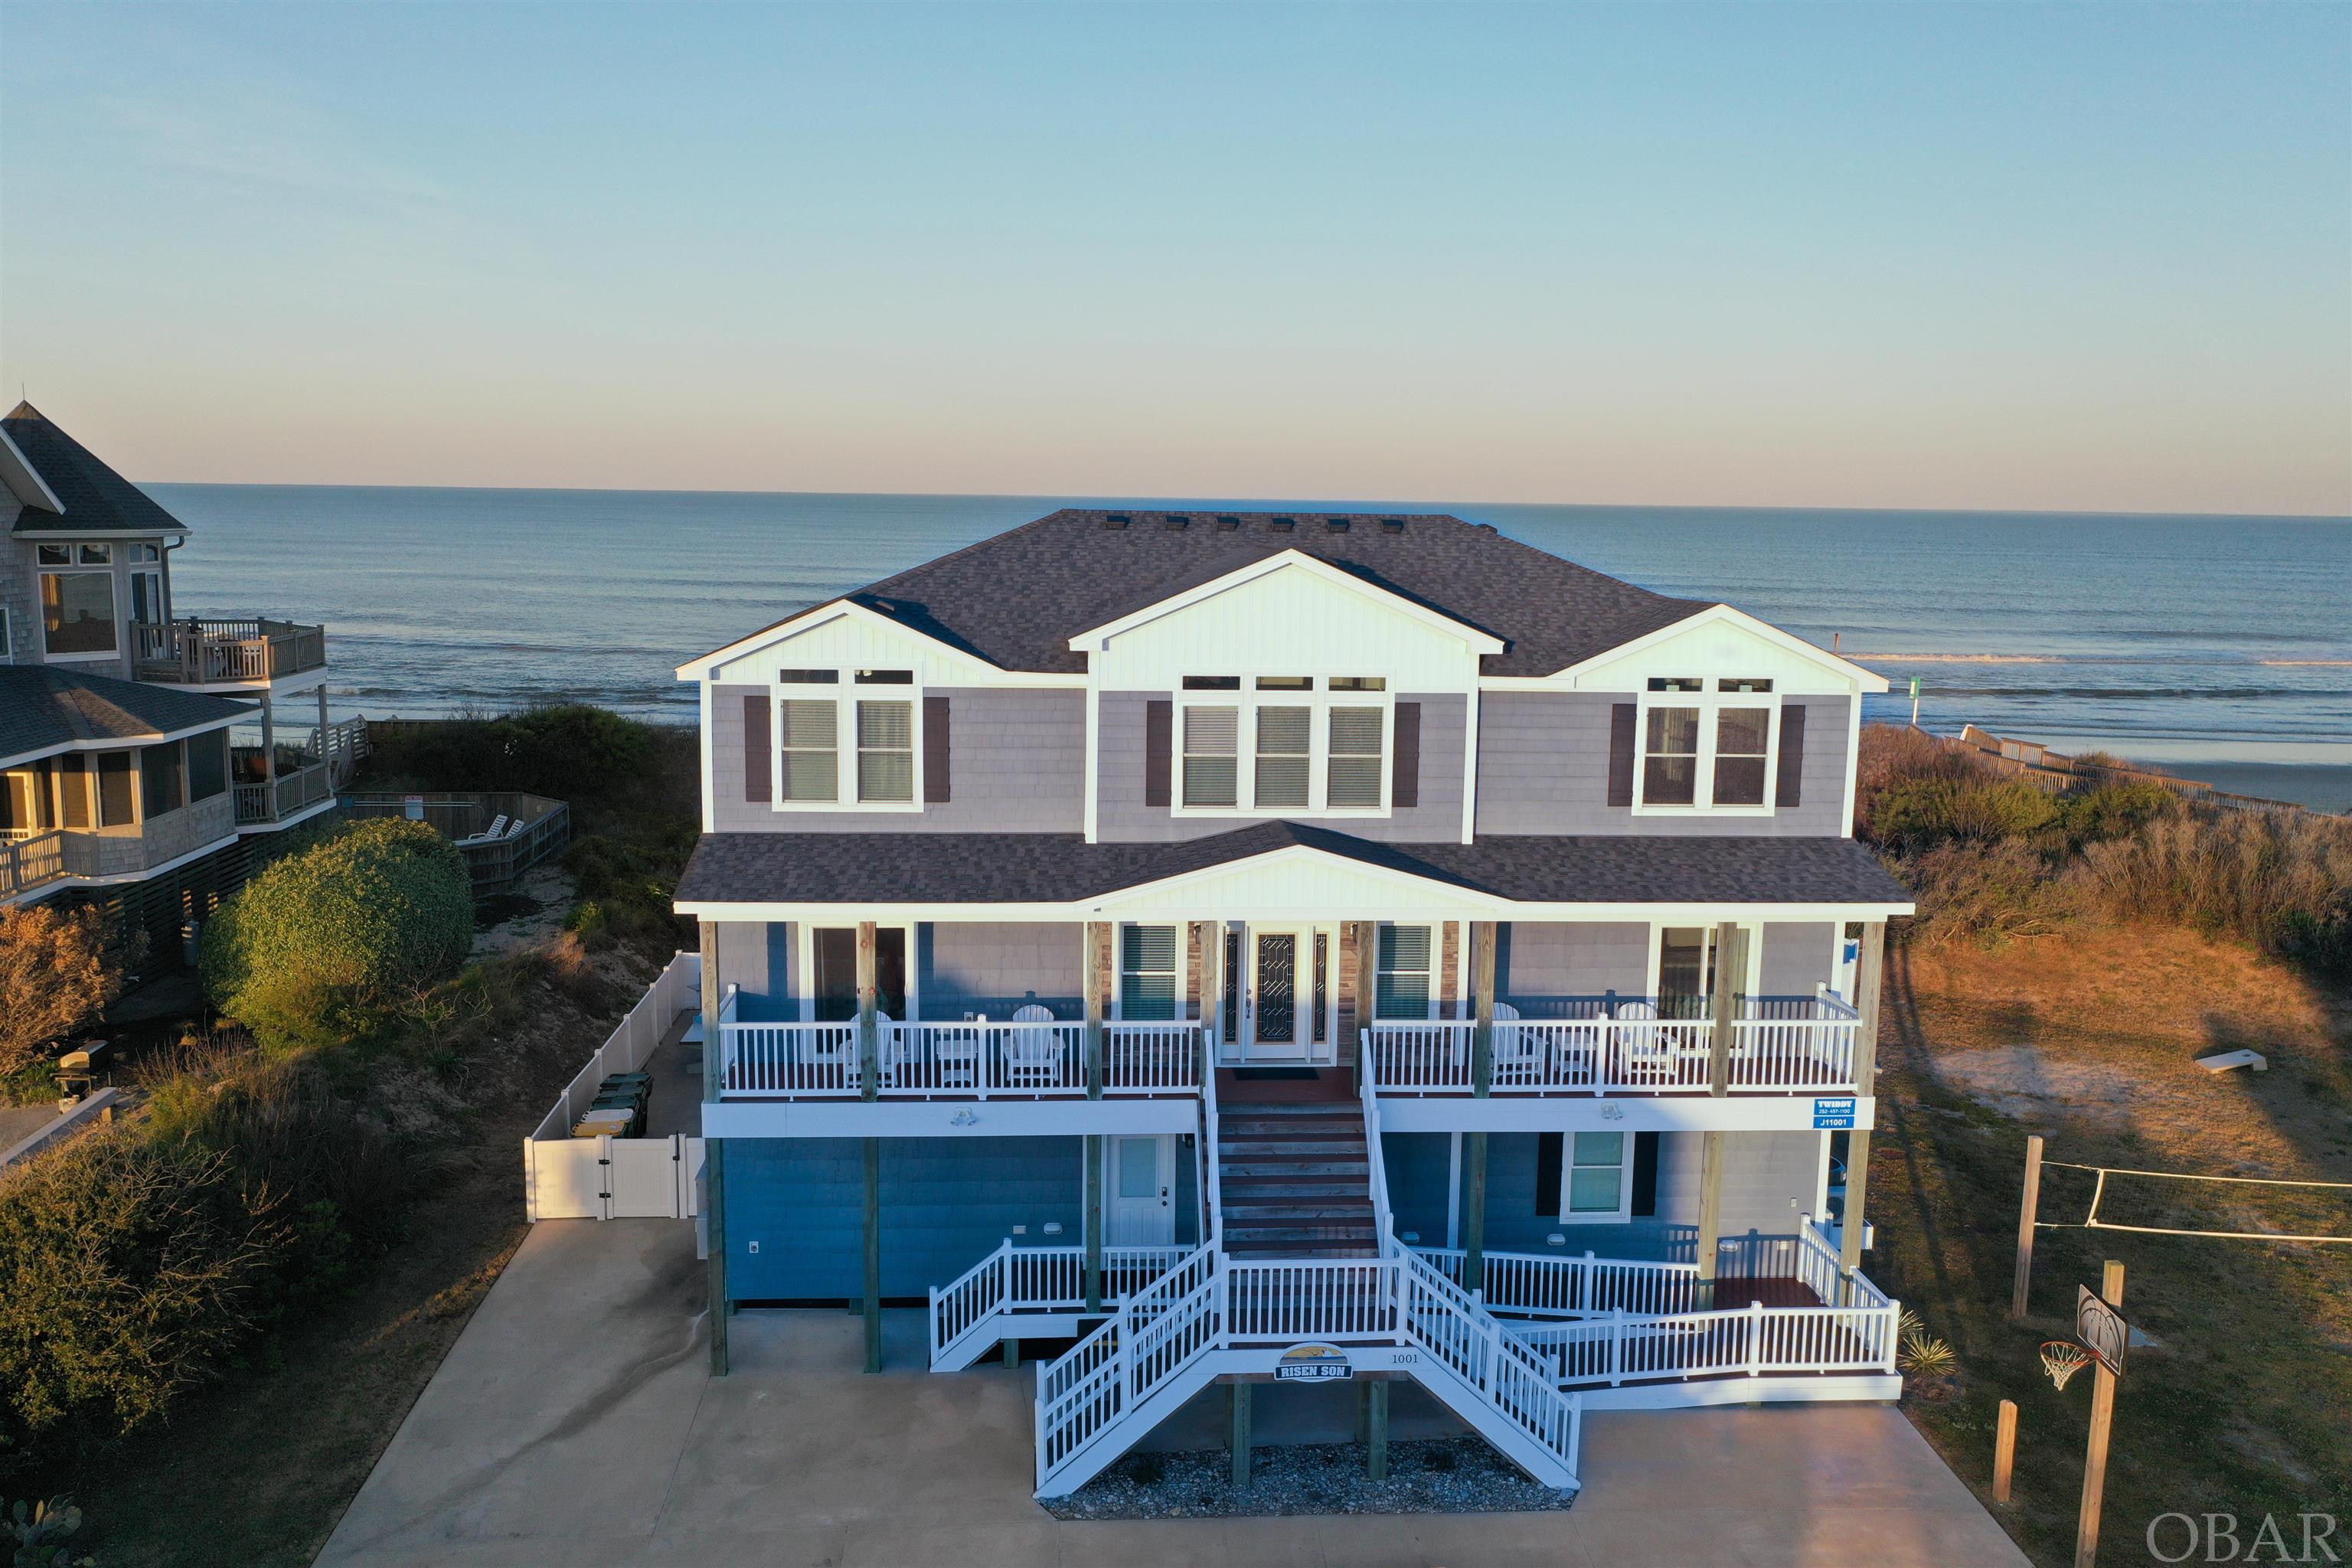 Oceanfront custom built home in the sought after Whalehead Club.  This builder had a design in mind to maximize space while creating a resort-like atmosphere. Owners and guests will enjoy endless Ocean views from the decks.Beautiful sunsets on the west and gorgeous sunrises from the east ,paradise!Easy access to all floors with the elevator. This can be a great destination beachfront home for all occasions. Easy walk through to the beach on the newly redone dune deck. Engaging outside amenities including heated saltwater pool with waterfall, recently added concrete ping pong table, foosball and corn hole Boards. There is a volleyball court and basketball hoop. No need to go inside when the Pool cabana includes a kitchen area with refrigerator, gas grill, Built to last furniture, TV, Stereo, bar and 1/2 bath with an outside shower. 11 suites all including their own bathrooms. This reverse floor plan has 3 Levels of living featuring a game room, theater and workout room on the first floor. A living room on the second floor. The 3rd floor is a Gourmet Kitchen with 2 double oven ranges, 2 dishwashers, 2 refrigerators , 50# ice maker and breakfast bar. The dining area consists of 2 large tables overlooking the ocean. This destination home was built for rentals with commercial grade LVP and carpet, 50 year landmark pro shingle with a zip roof underneath. Trex decking and upgraded shake siding no detail was overlooked fasteners all  stainless steel.This location allows easy access to restaurants, stores and the many activities in the area. Or Enjoy your personal paradise. Rental projections on file.This one of the top performing homes in Whalehead! Come visit The Risen Son today. Add to your Investment  portfolio.   Great investment excellent location! Call to see!